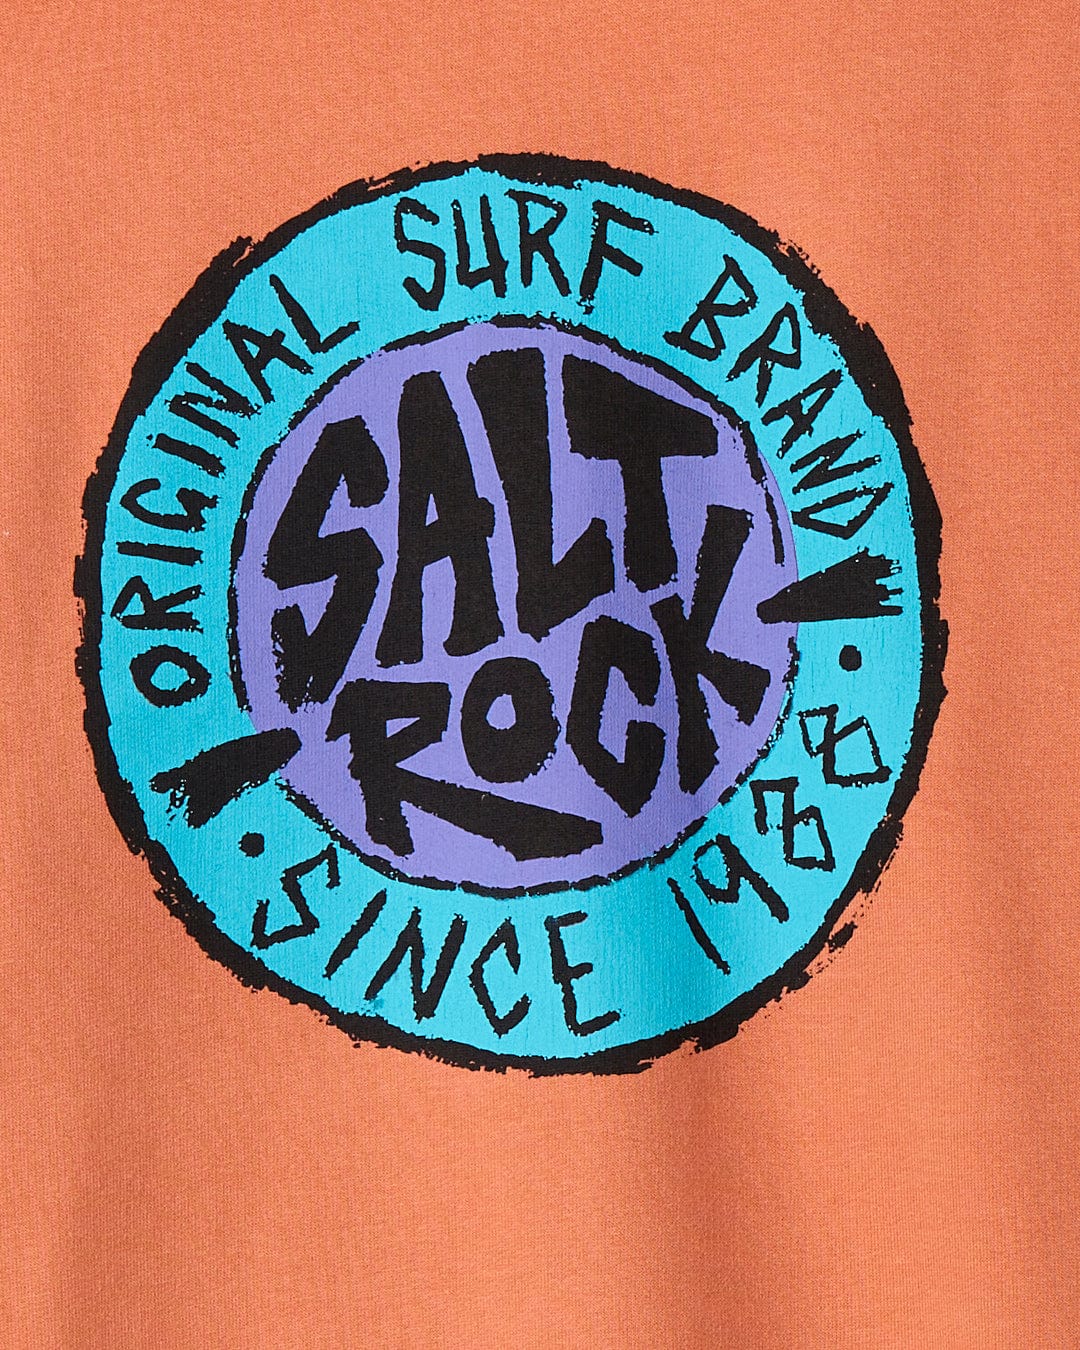 Logo of "SR Original - Recycled Mens Zip hoodie - Orange" printed in blue and black on a rust-colored fabric by Saltrock retro surf, original surf brand since 1988.